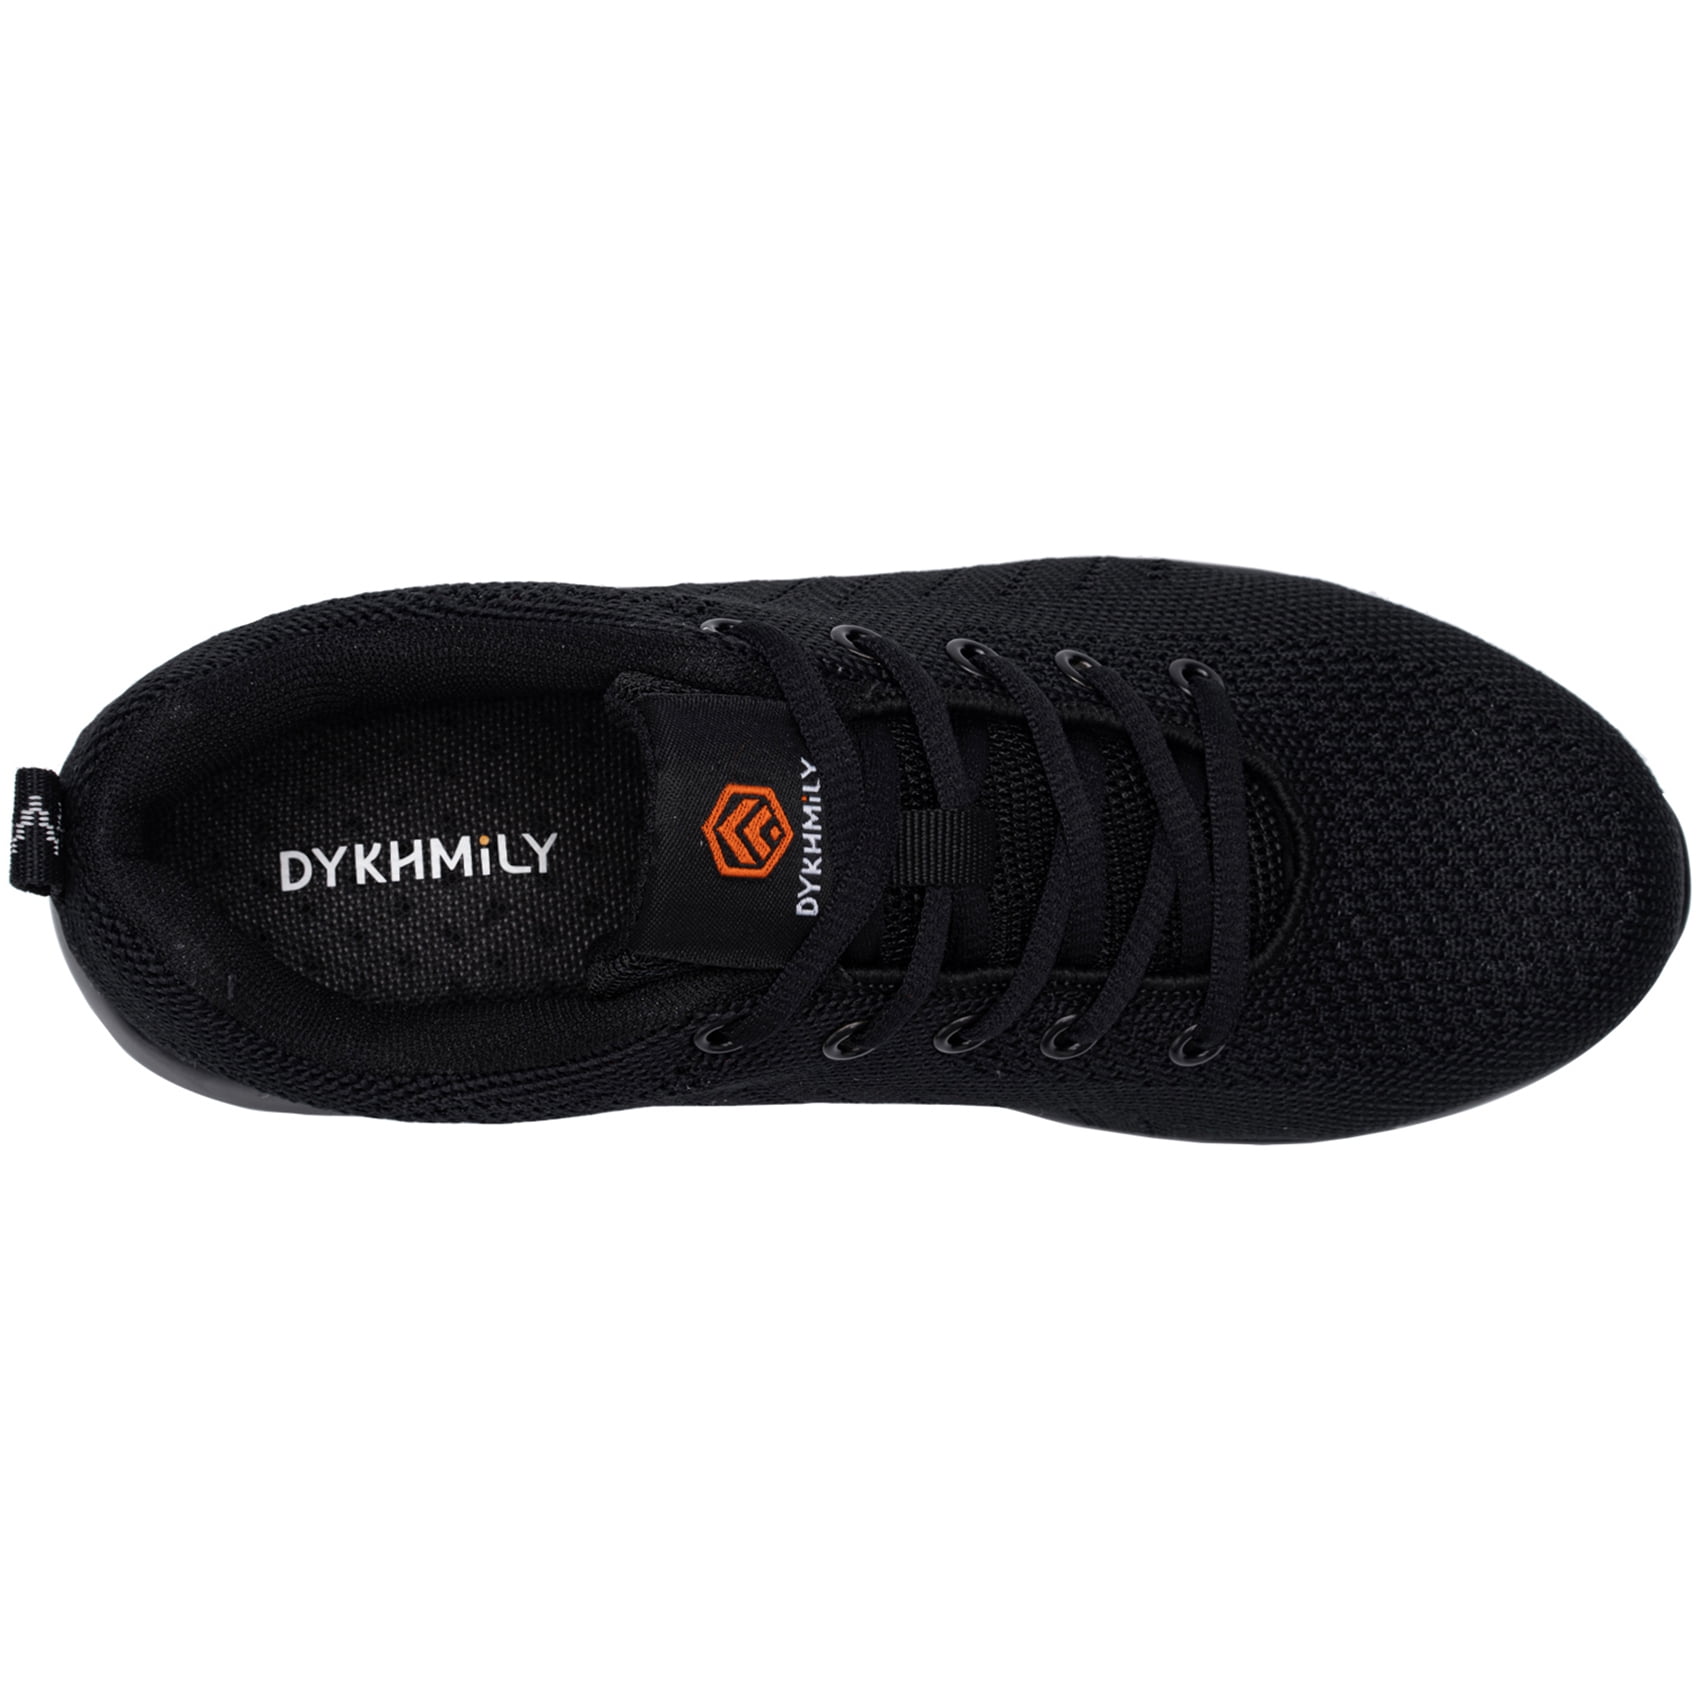 DYKHMILY Steel Toe Shoes for Men Women Air Cushion Lightweight Safety Sneakers Slip Resistant Work Shoe Puncture Proof Walking Shoes 